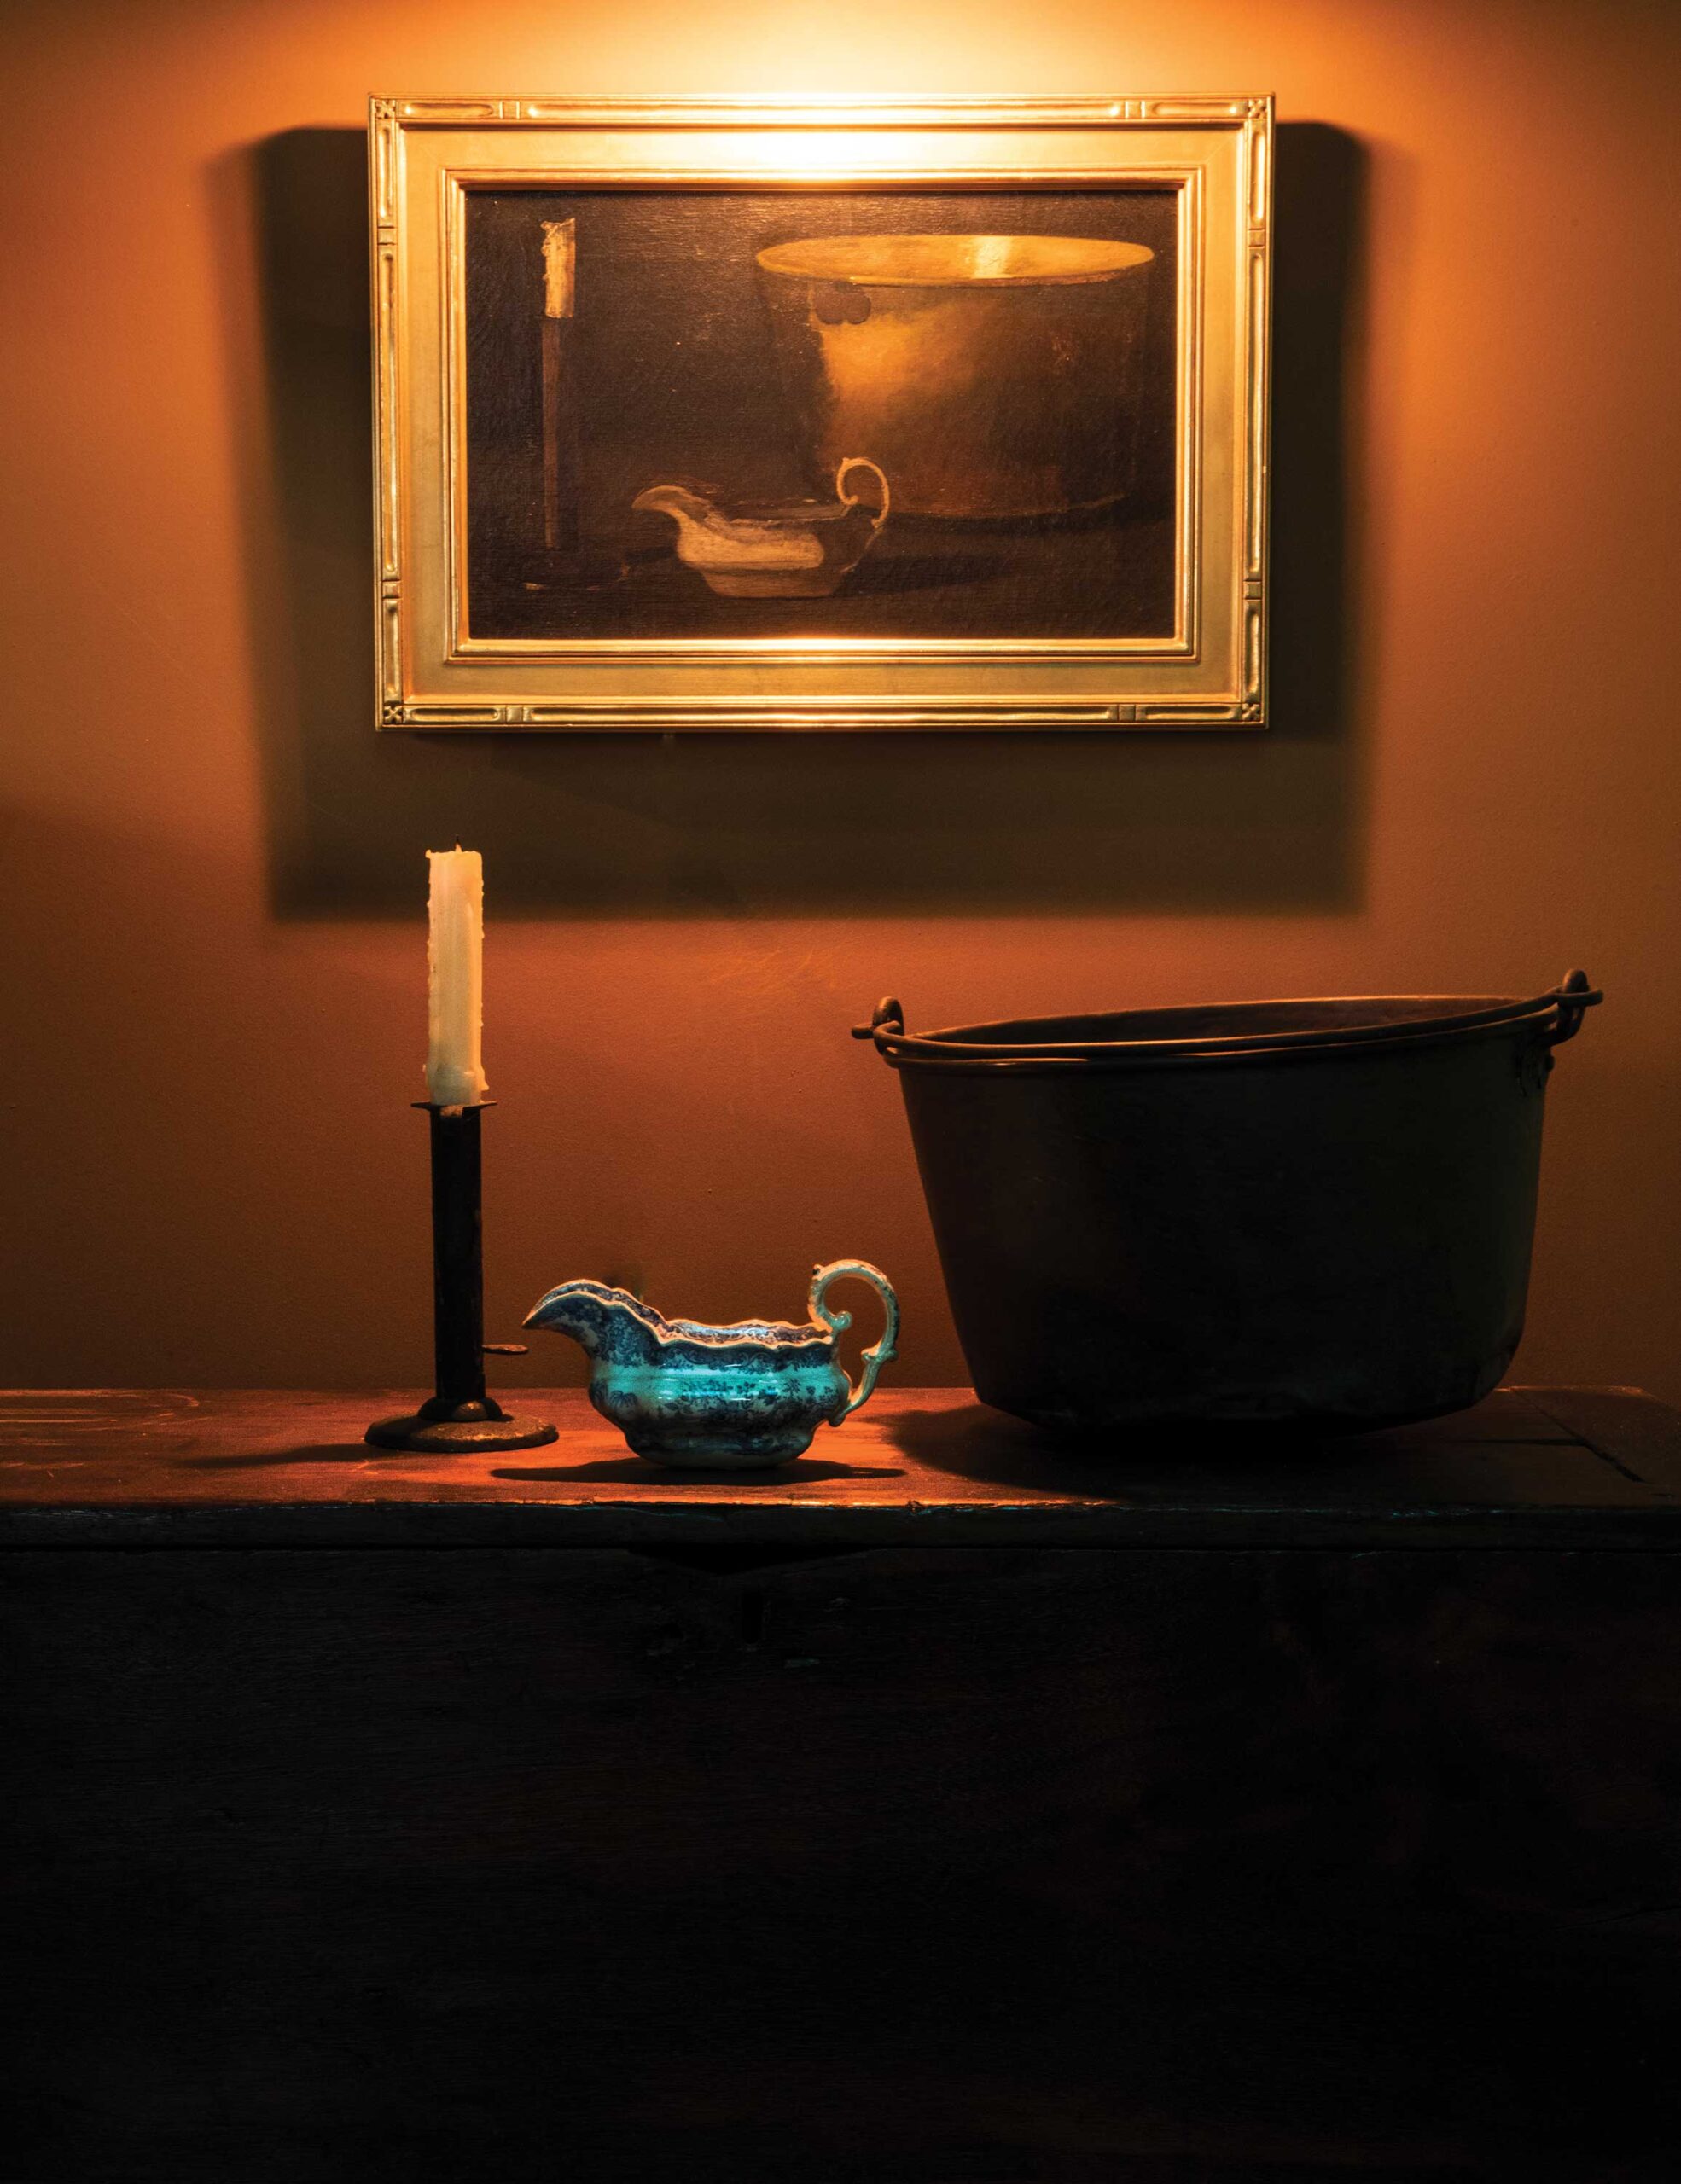 Peto’s painting "Brass Stewing Kettle, Candlestick, and Gravy Boat" (c. 1890) hangs above the original candlestick, gravy boat, and kettle that appear in it. 